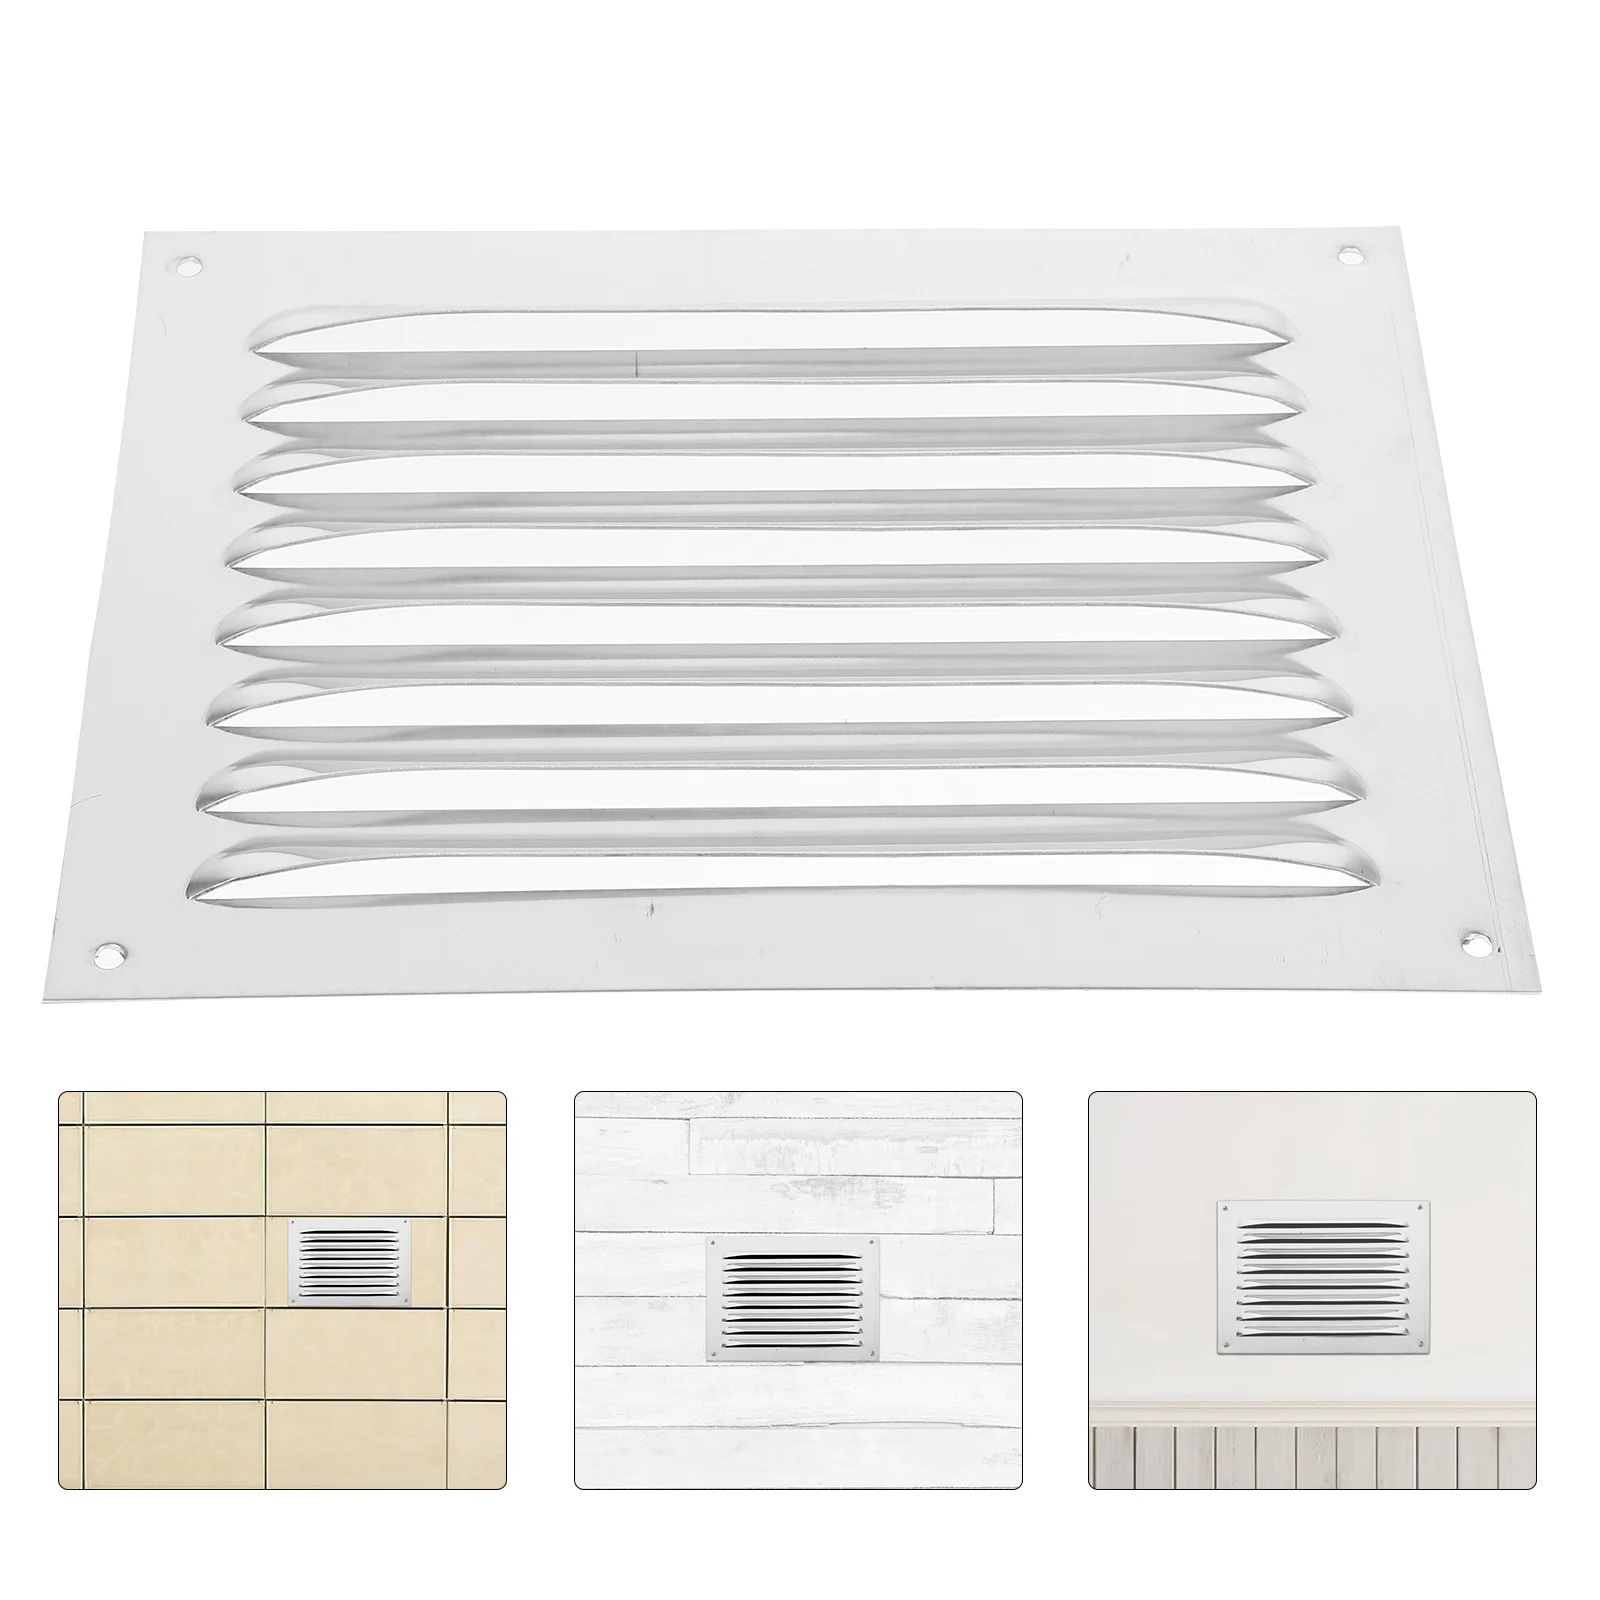 

Air Vent Return Grille Louvered Ventilation Grille Square Air Vent Grille Cover for Home Office